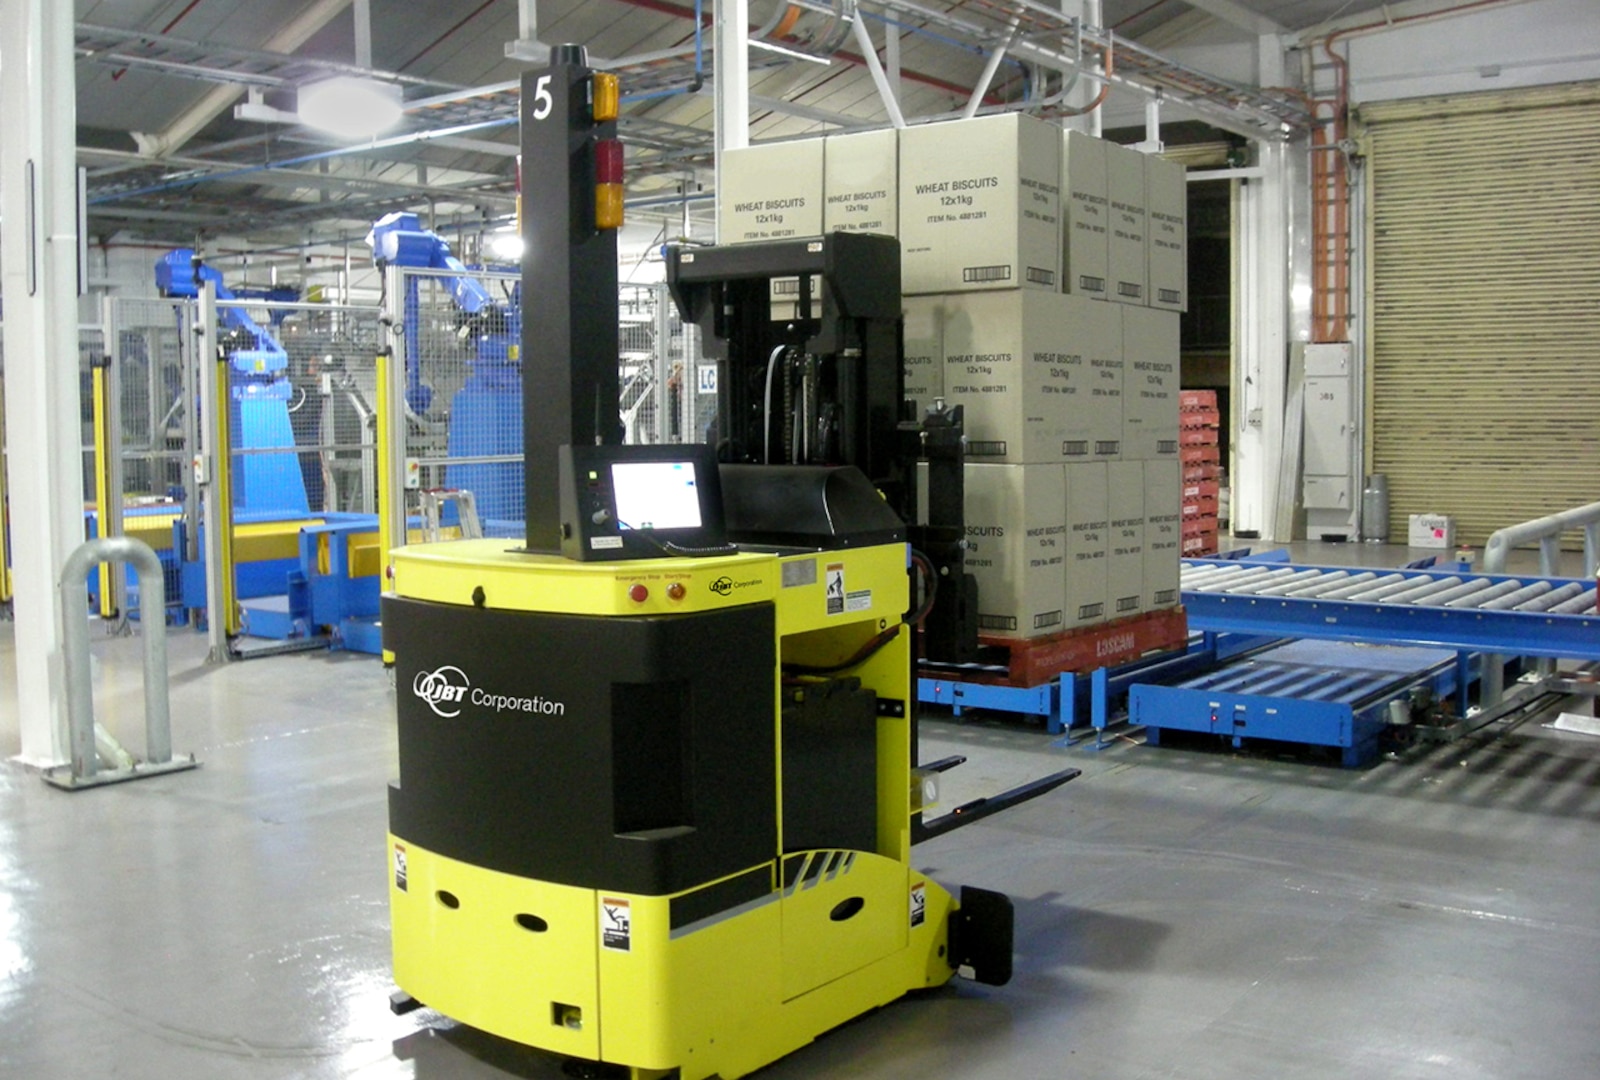 New technologies such as this automated forklift could soon be available to DLA employees.